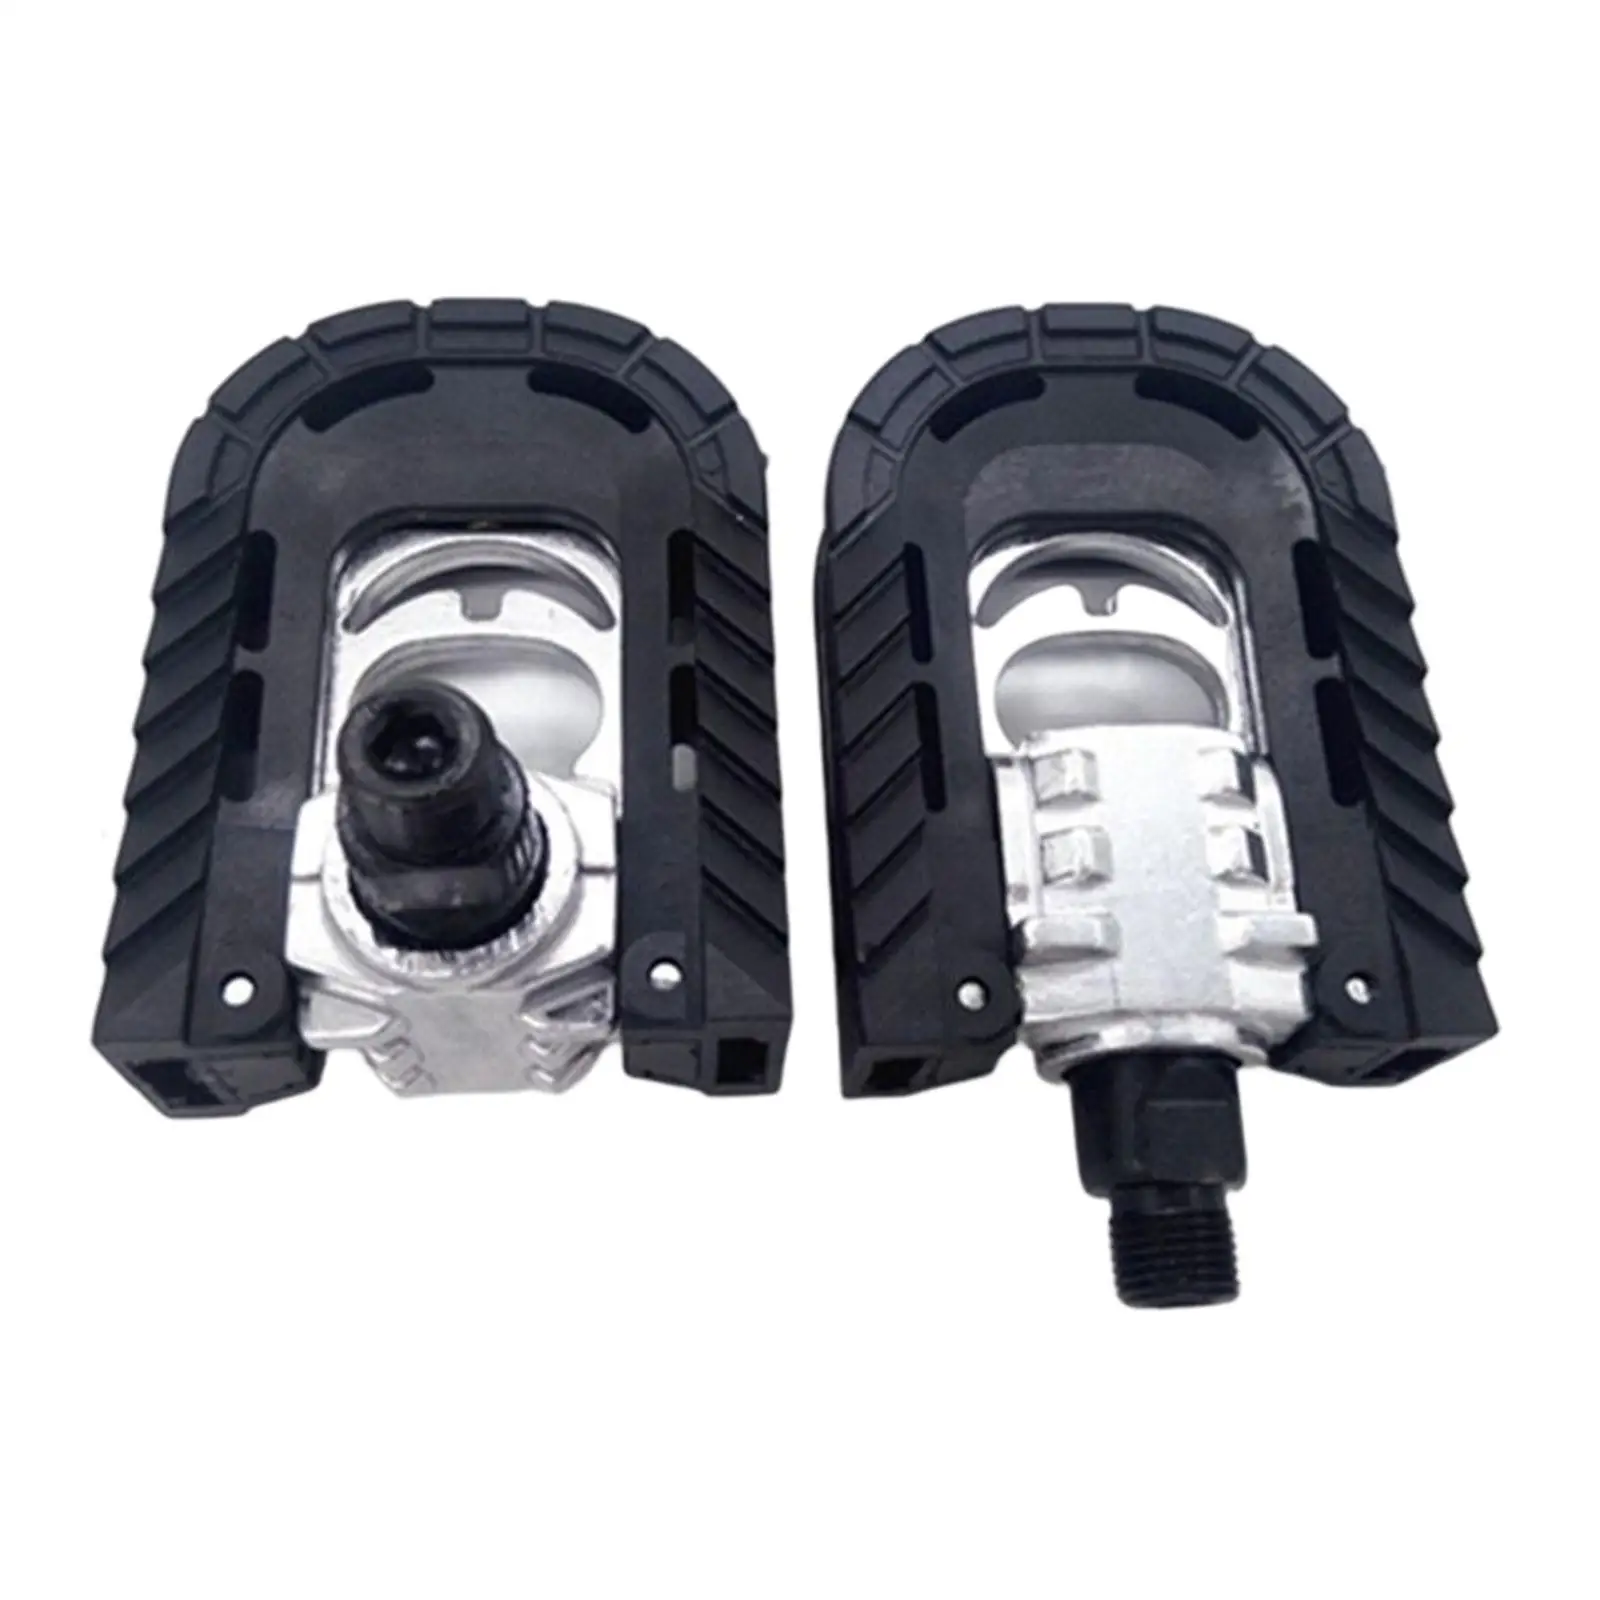 Foldable Bike Pedals Metal Replacement Folded Cycling Pedals Bicycle Folding Pedals for Biking Cycling Parts Road Bikes